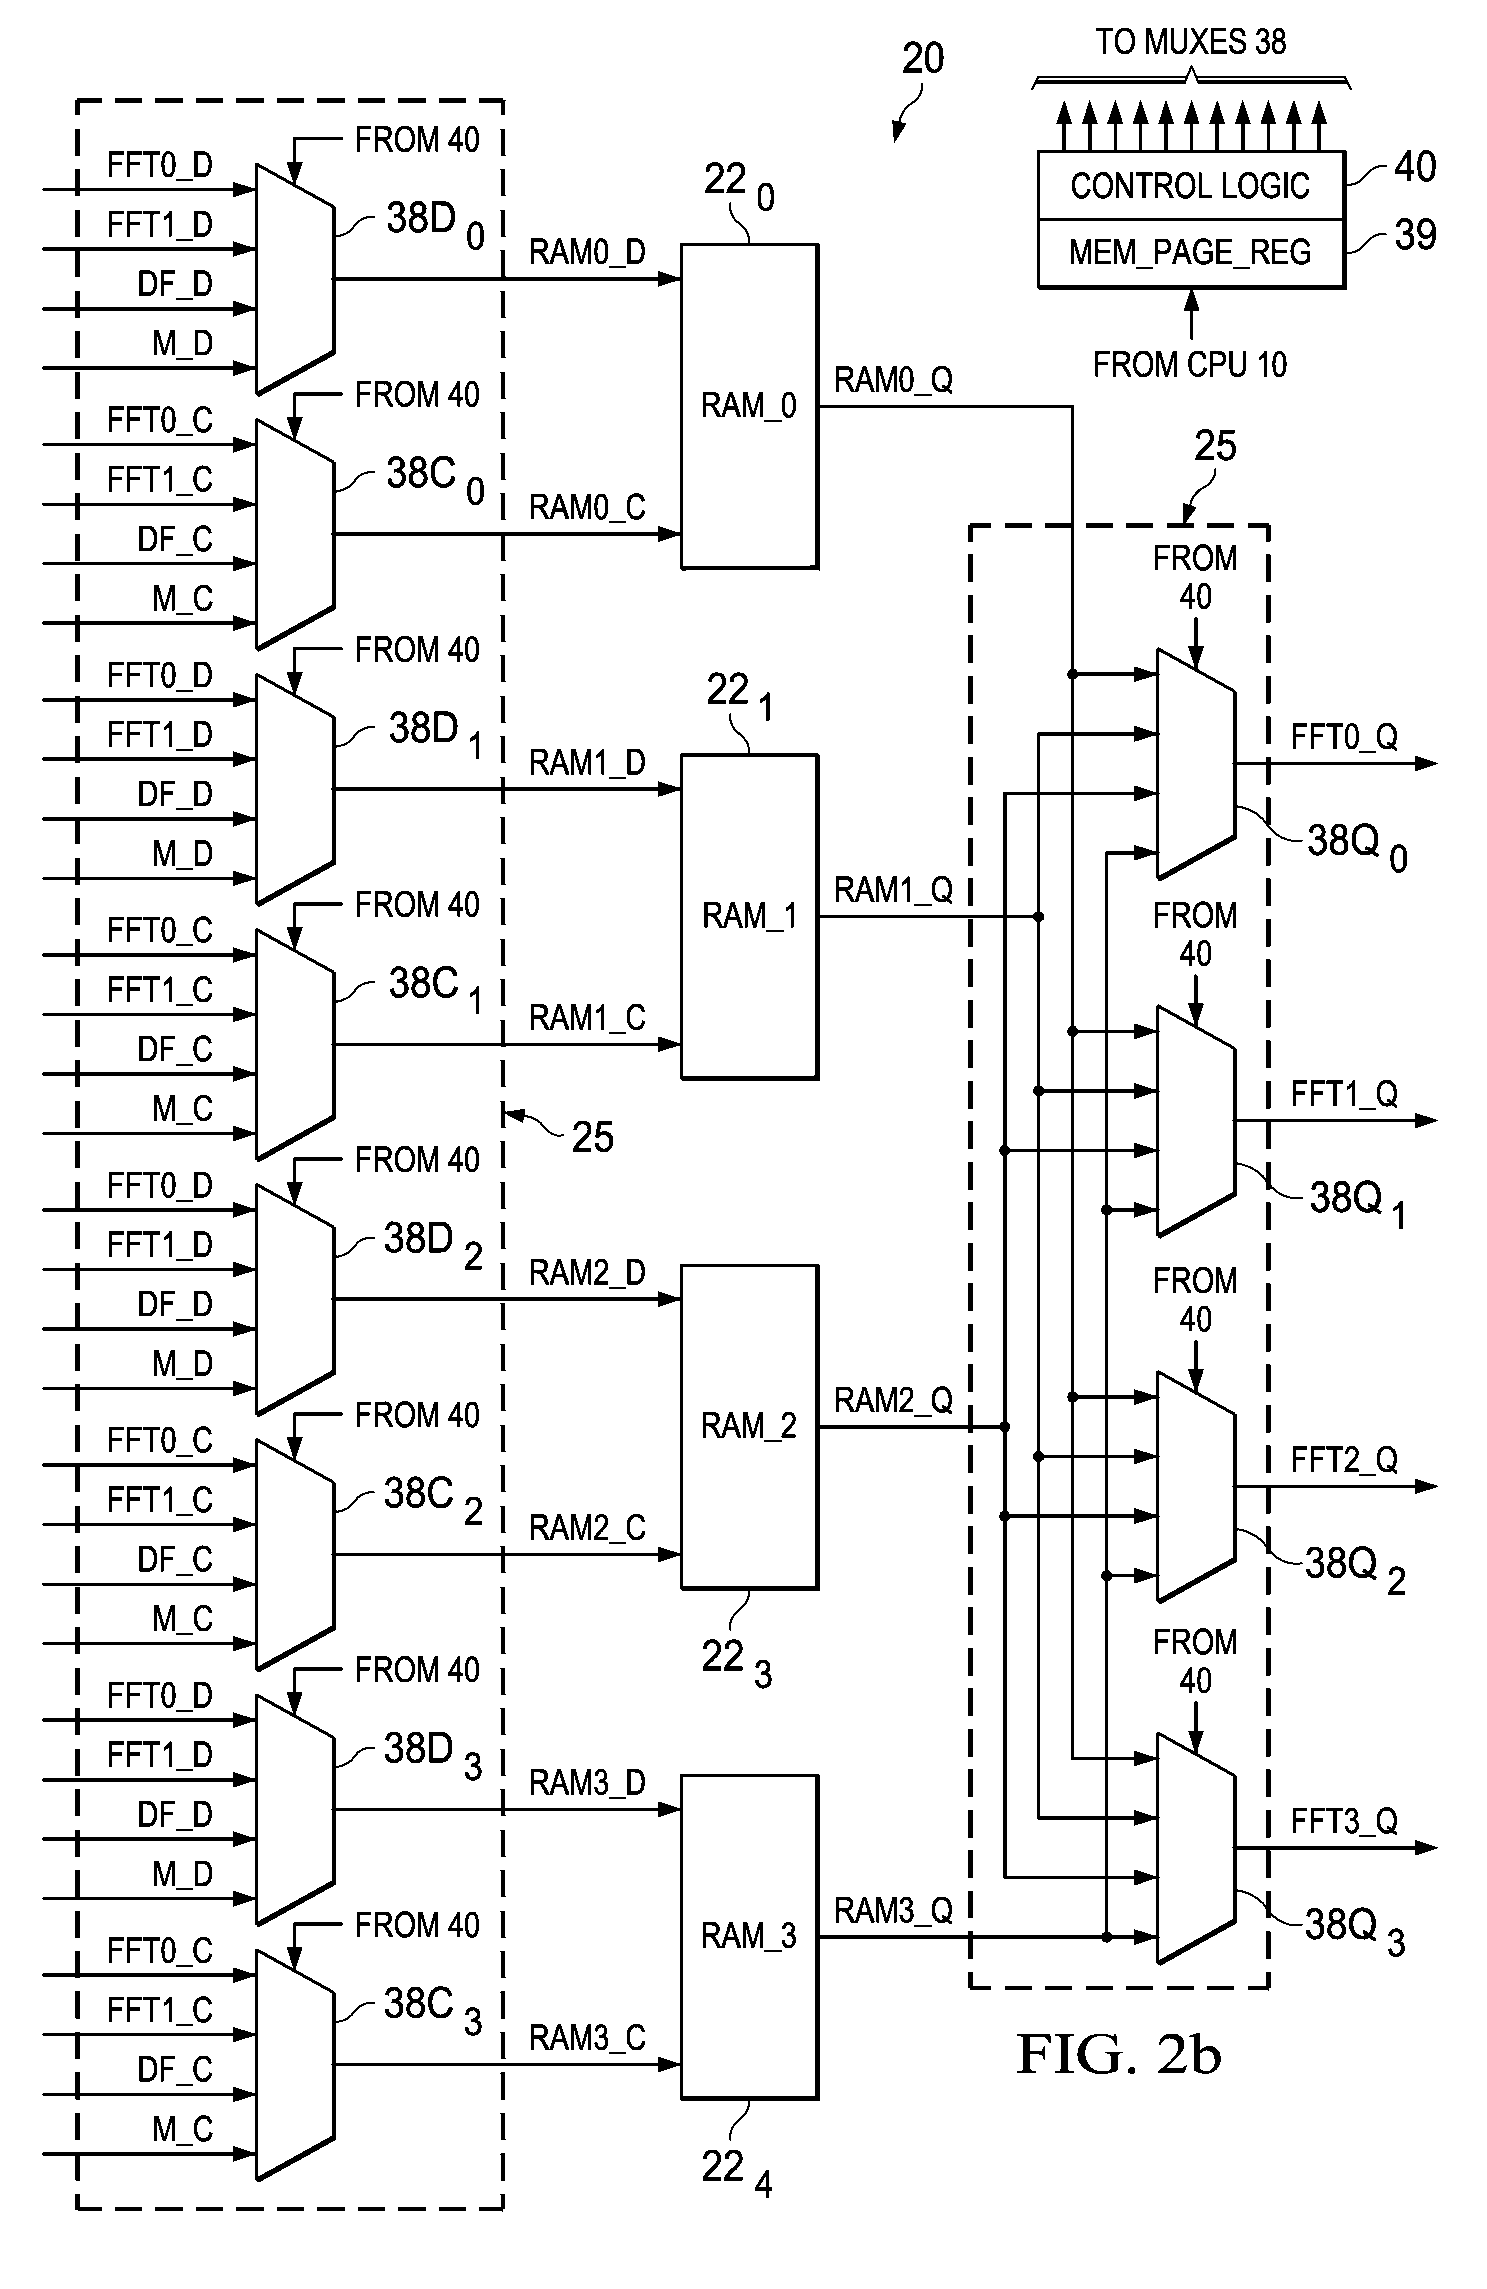 Pipelined access by FFT and filter units in co-processor and system bus slave to memory blocks via switch coupling based on control register content